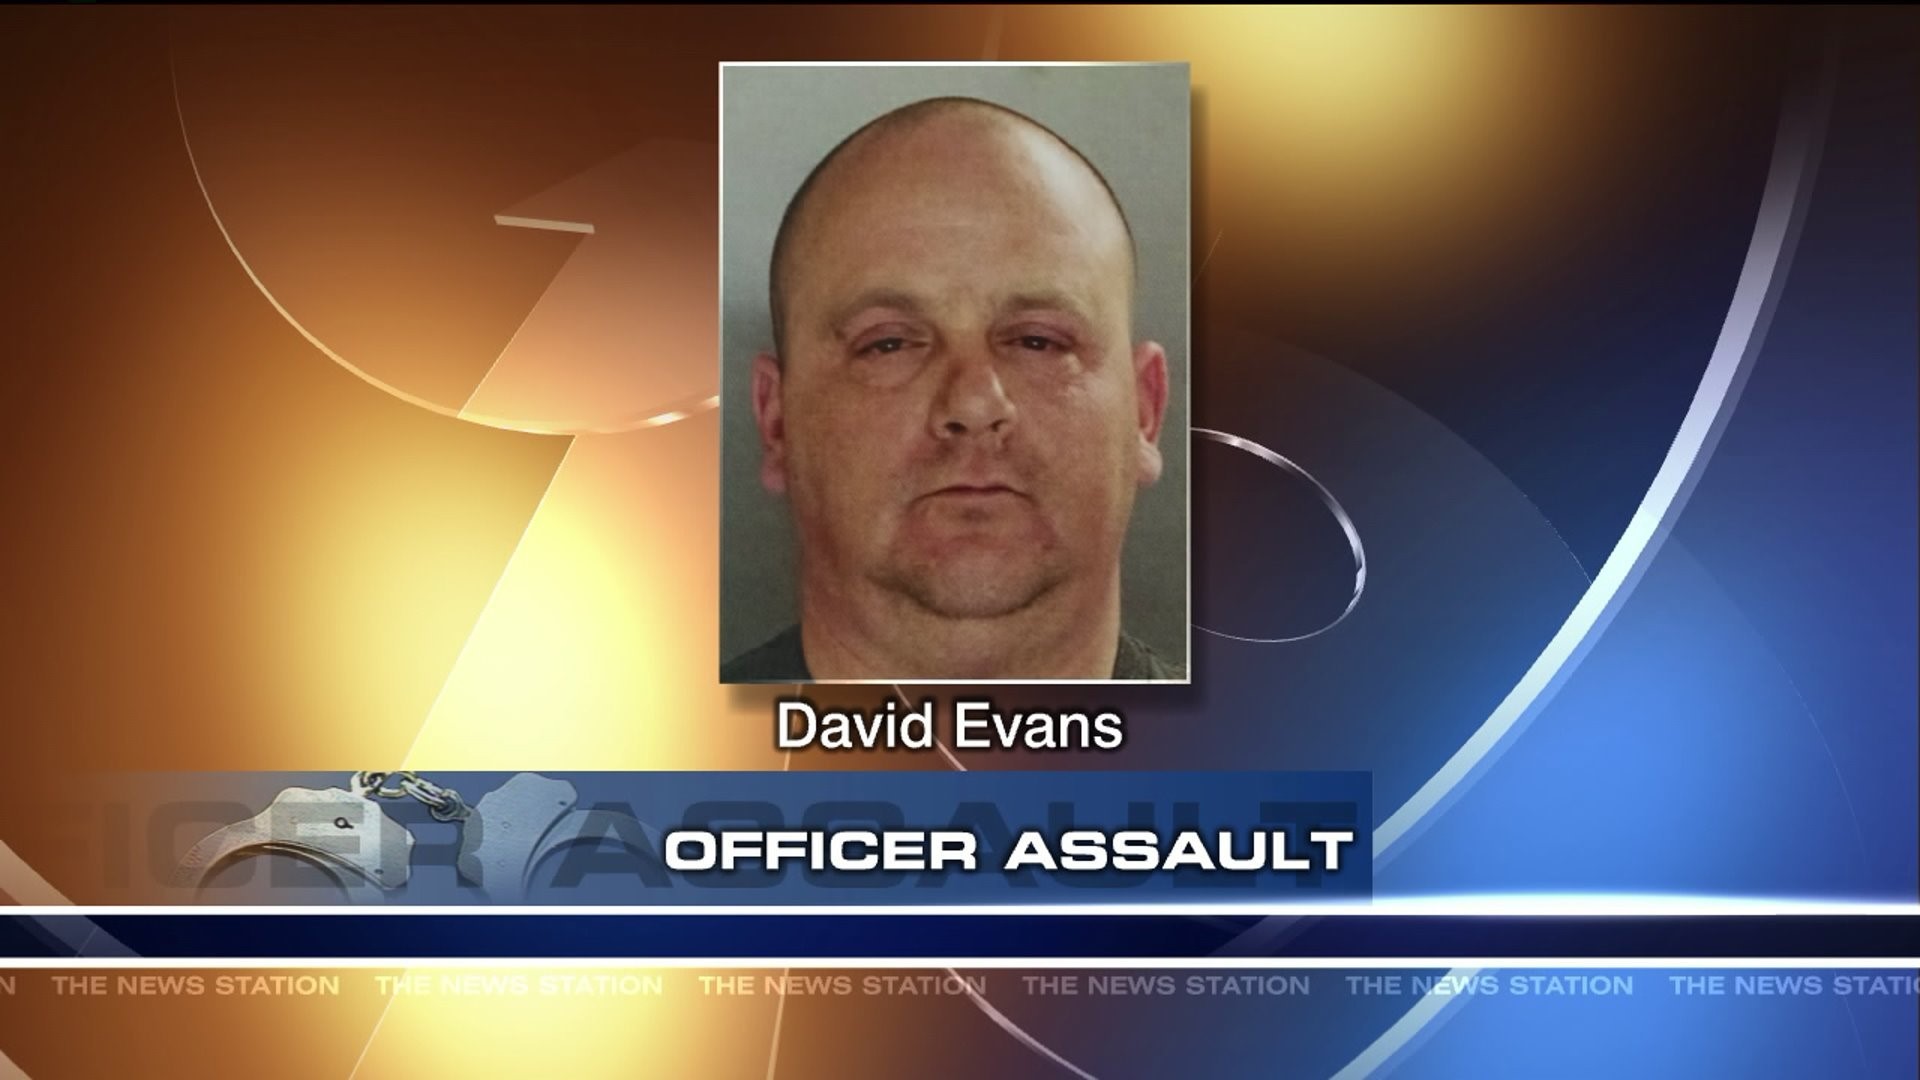 Man Accused Of Assaulting Police Officer